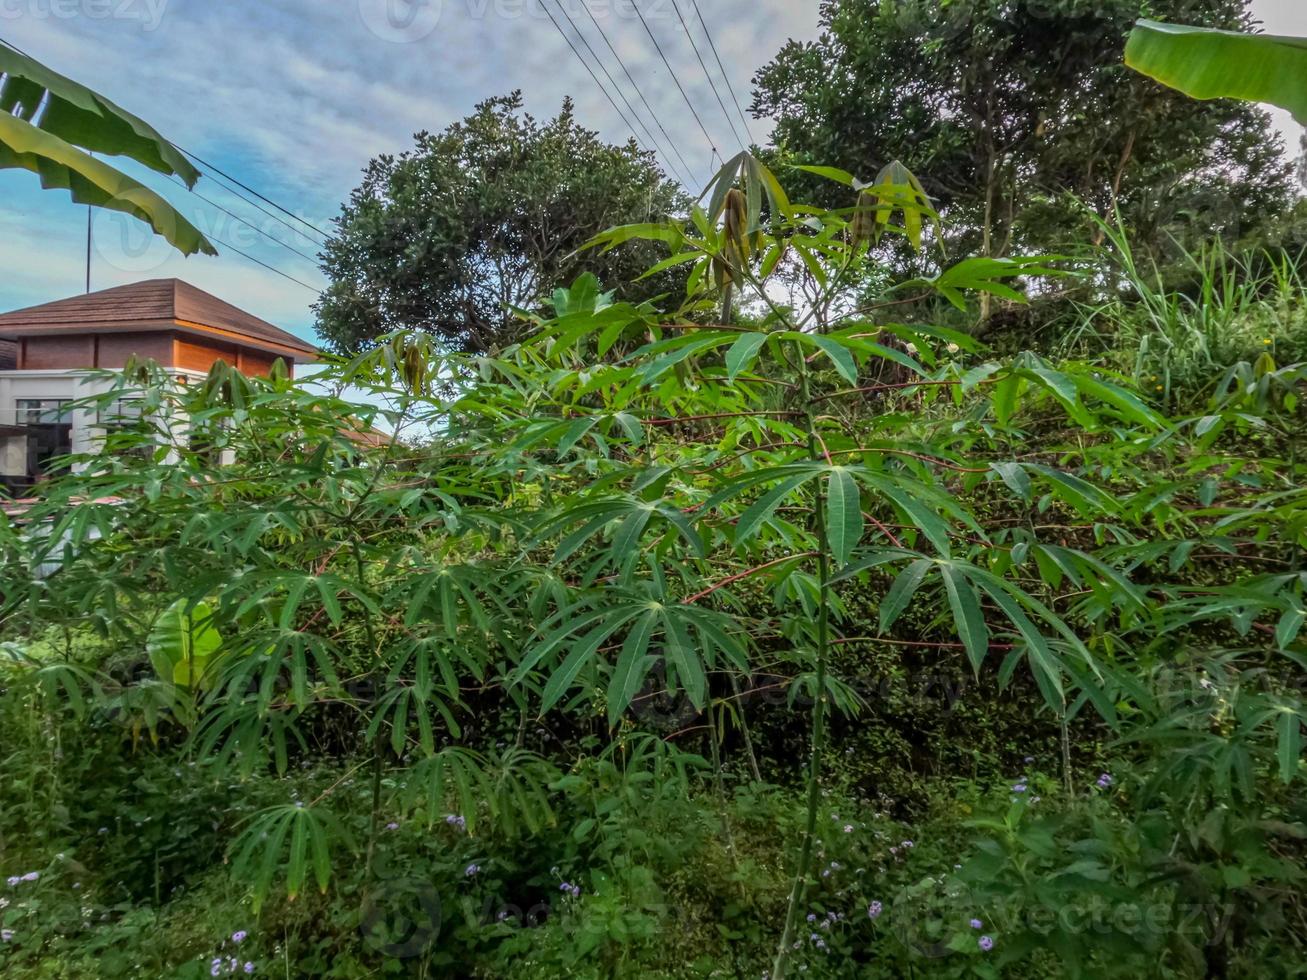 Cassava plant is still young, with green leaves, traditionally cultivated in the highlands photo